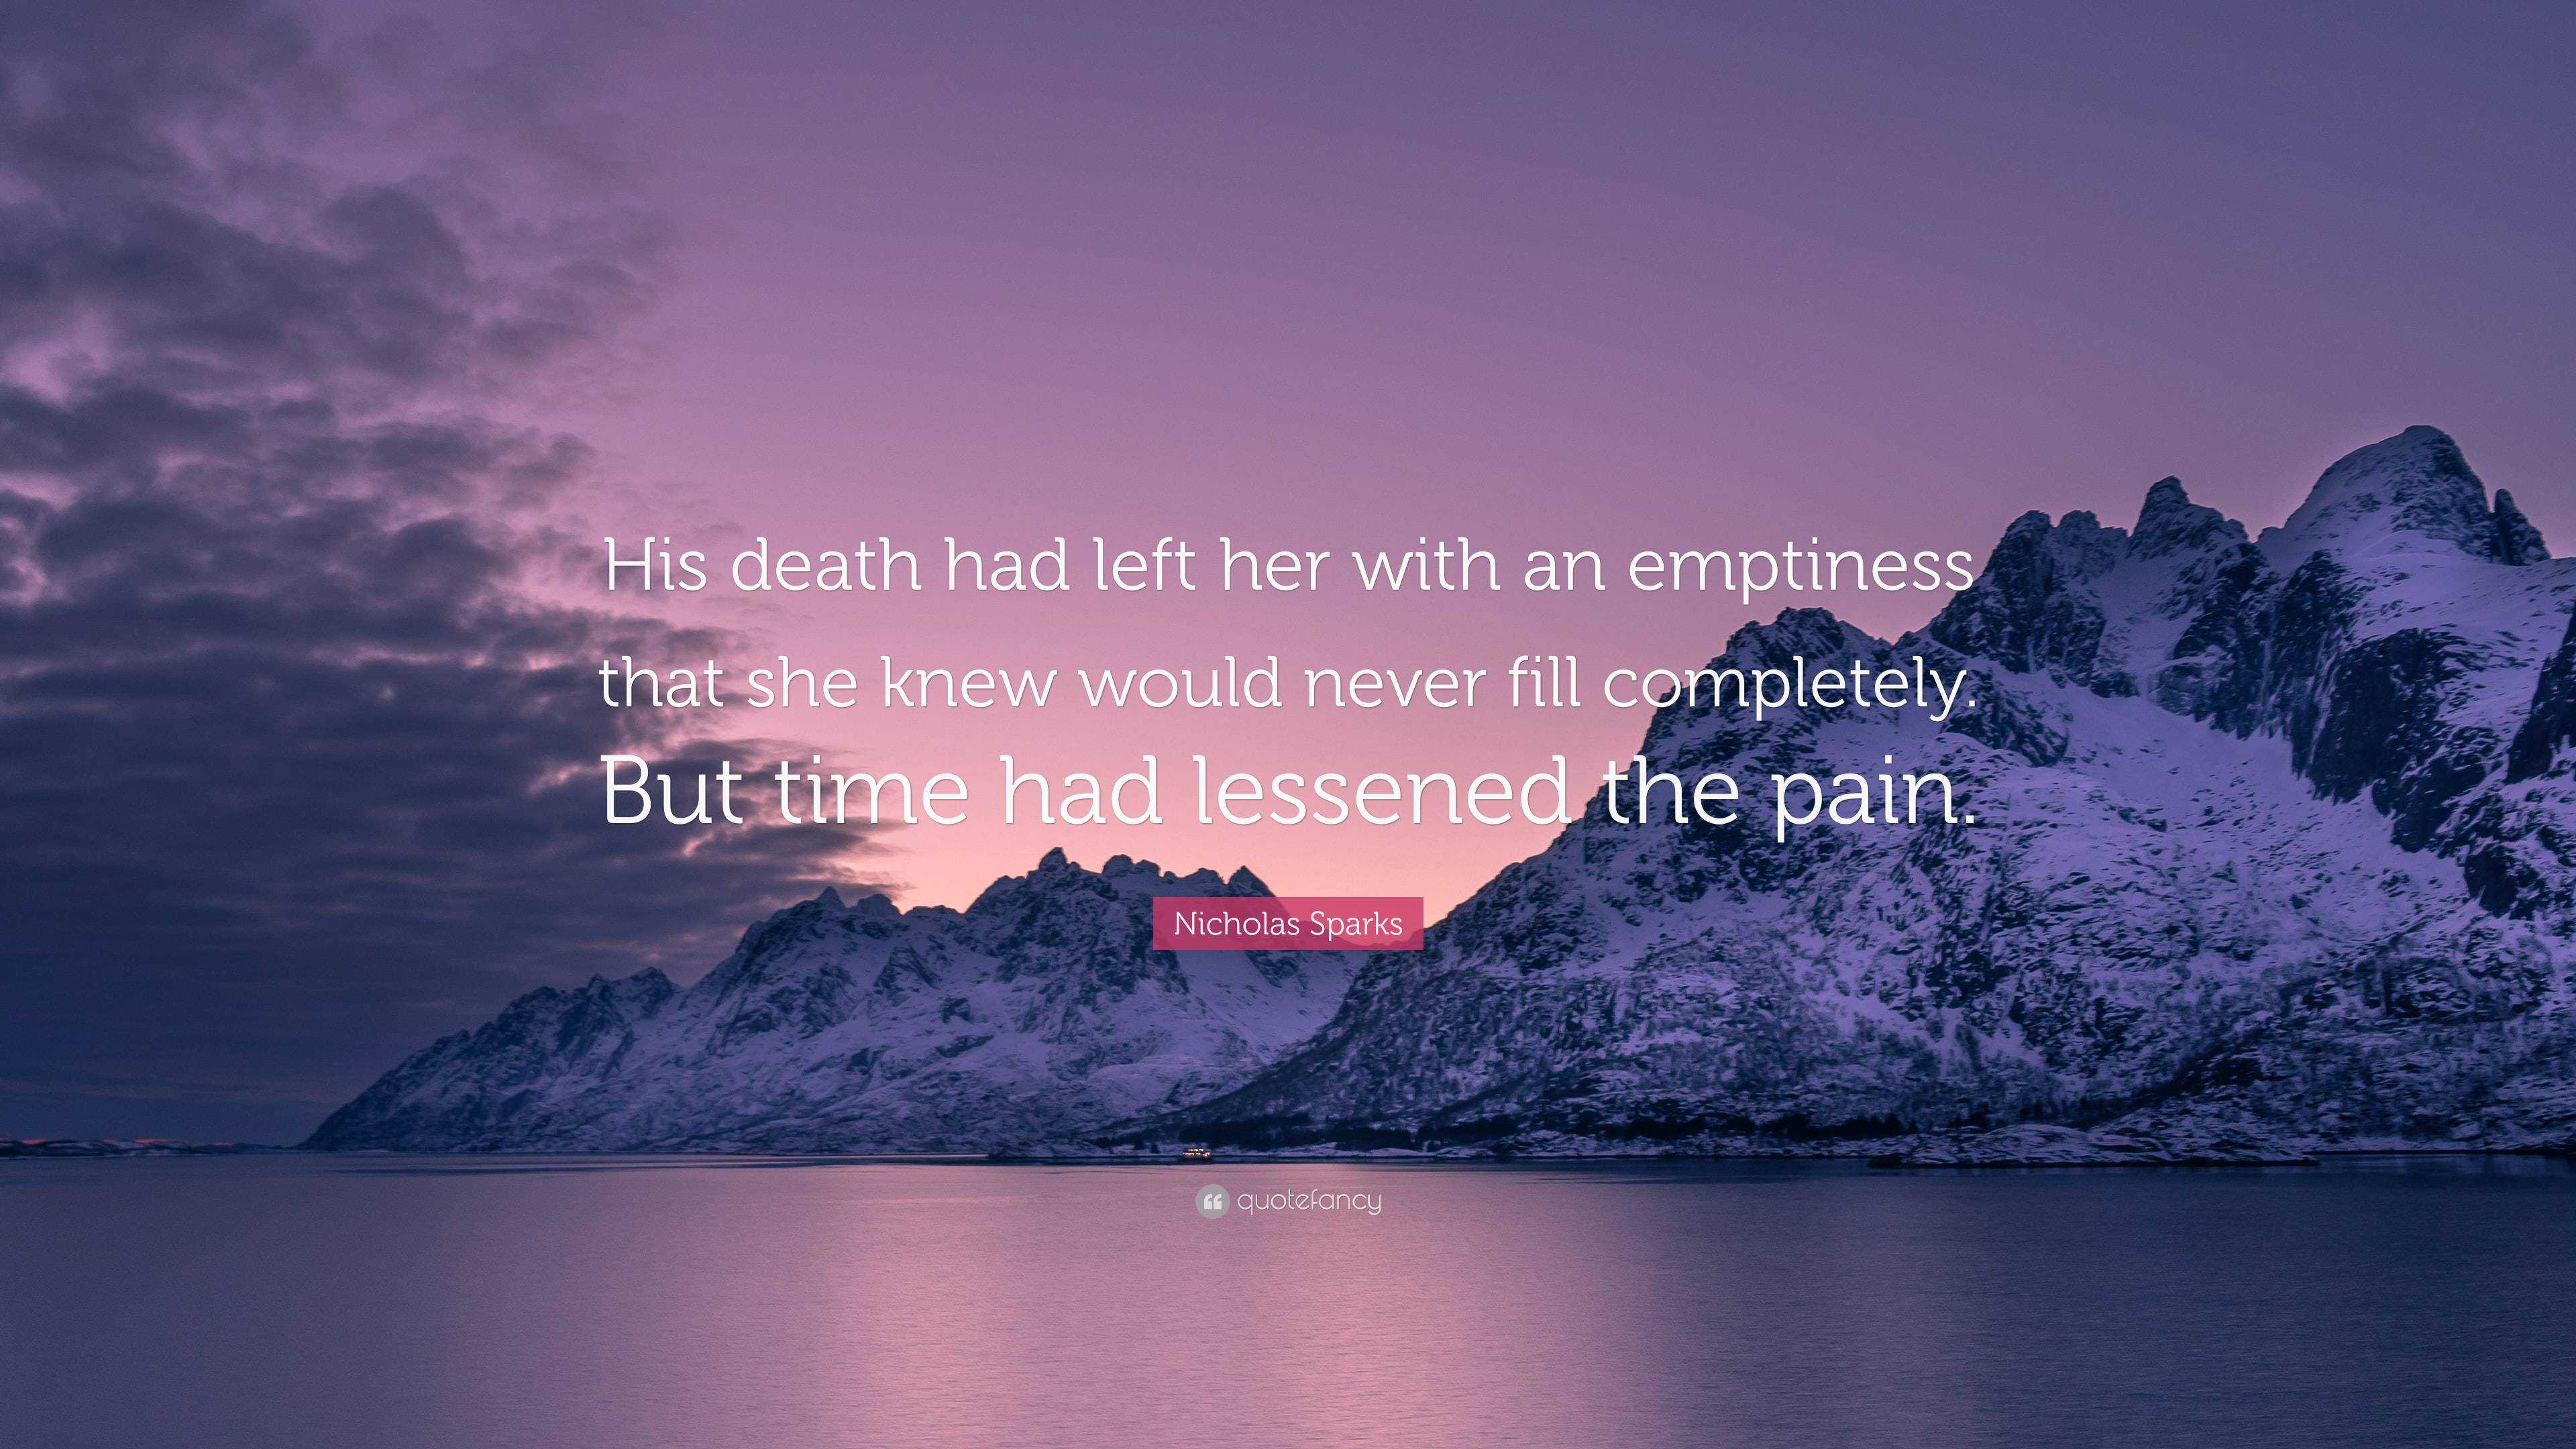 Nicholas Sparks Quote: “His death had left her with an emptiness that ...